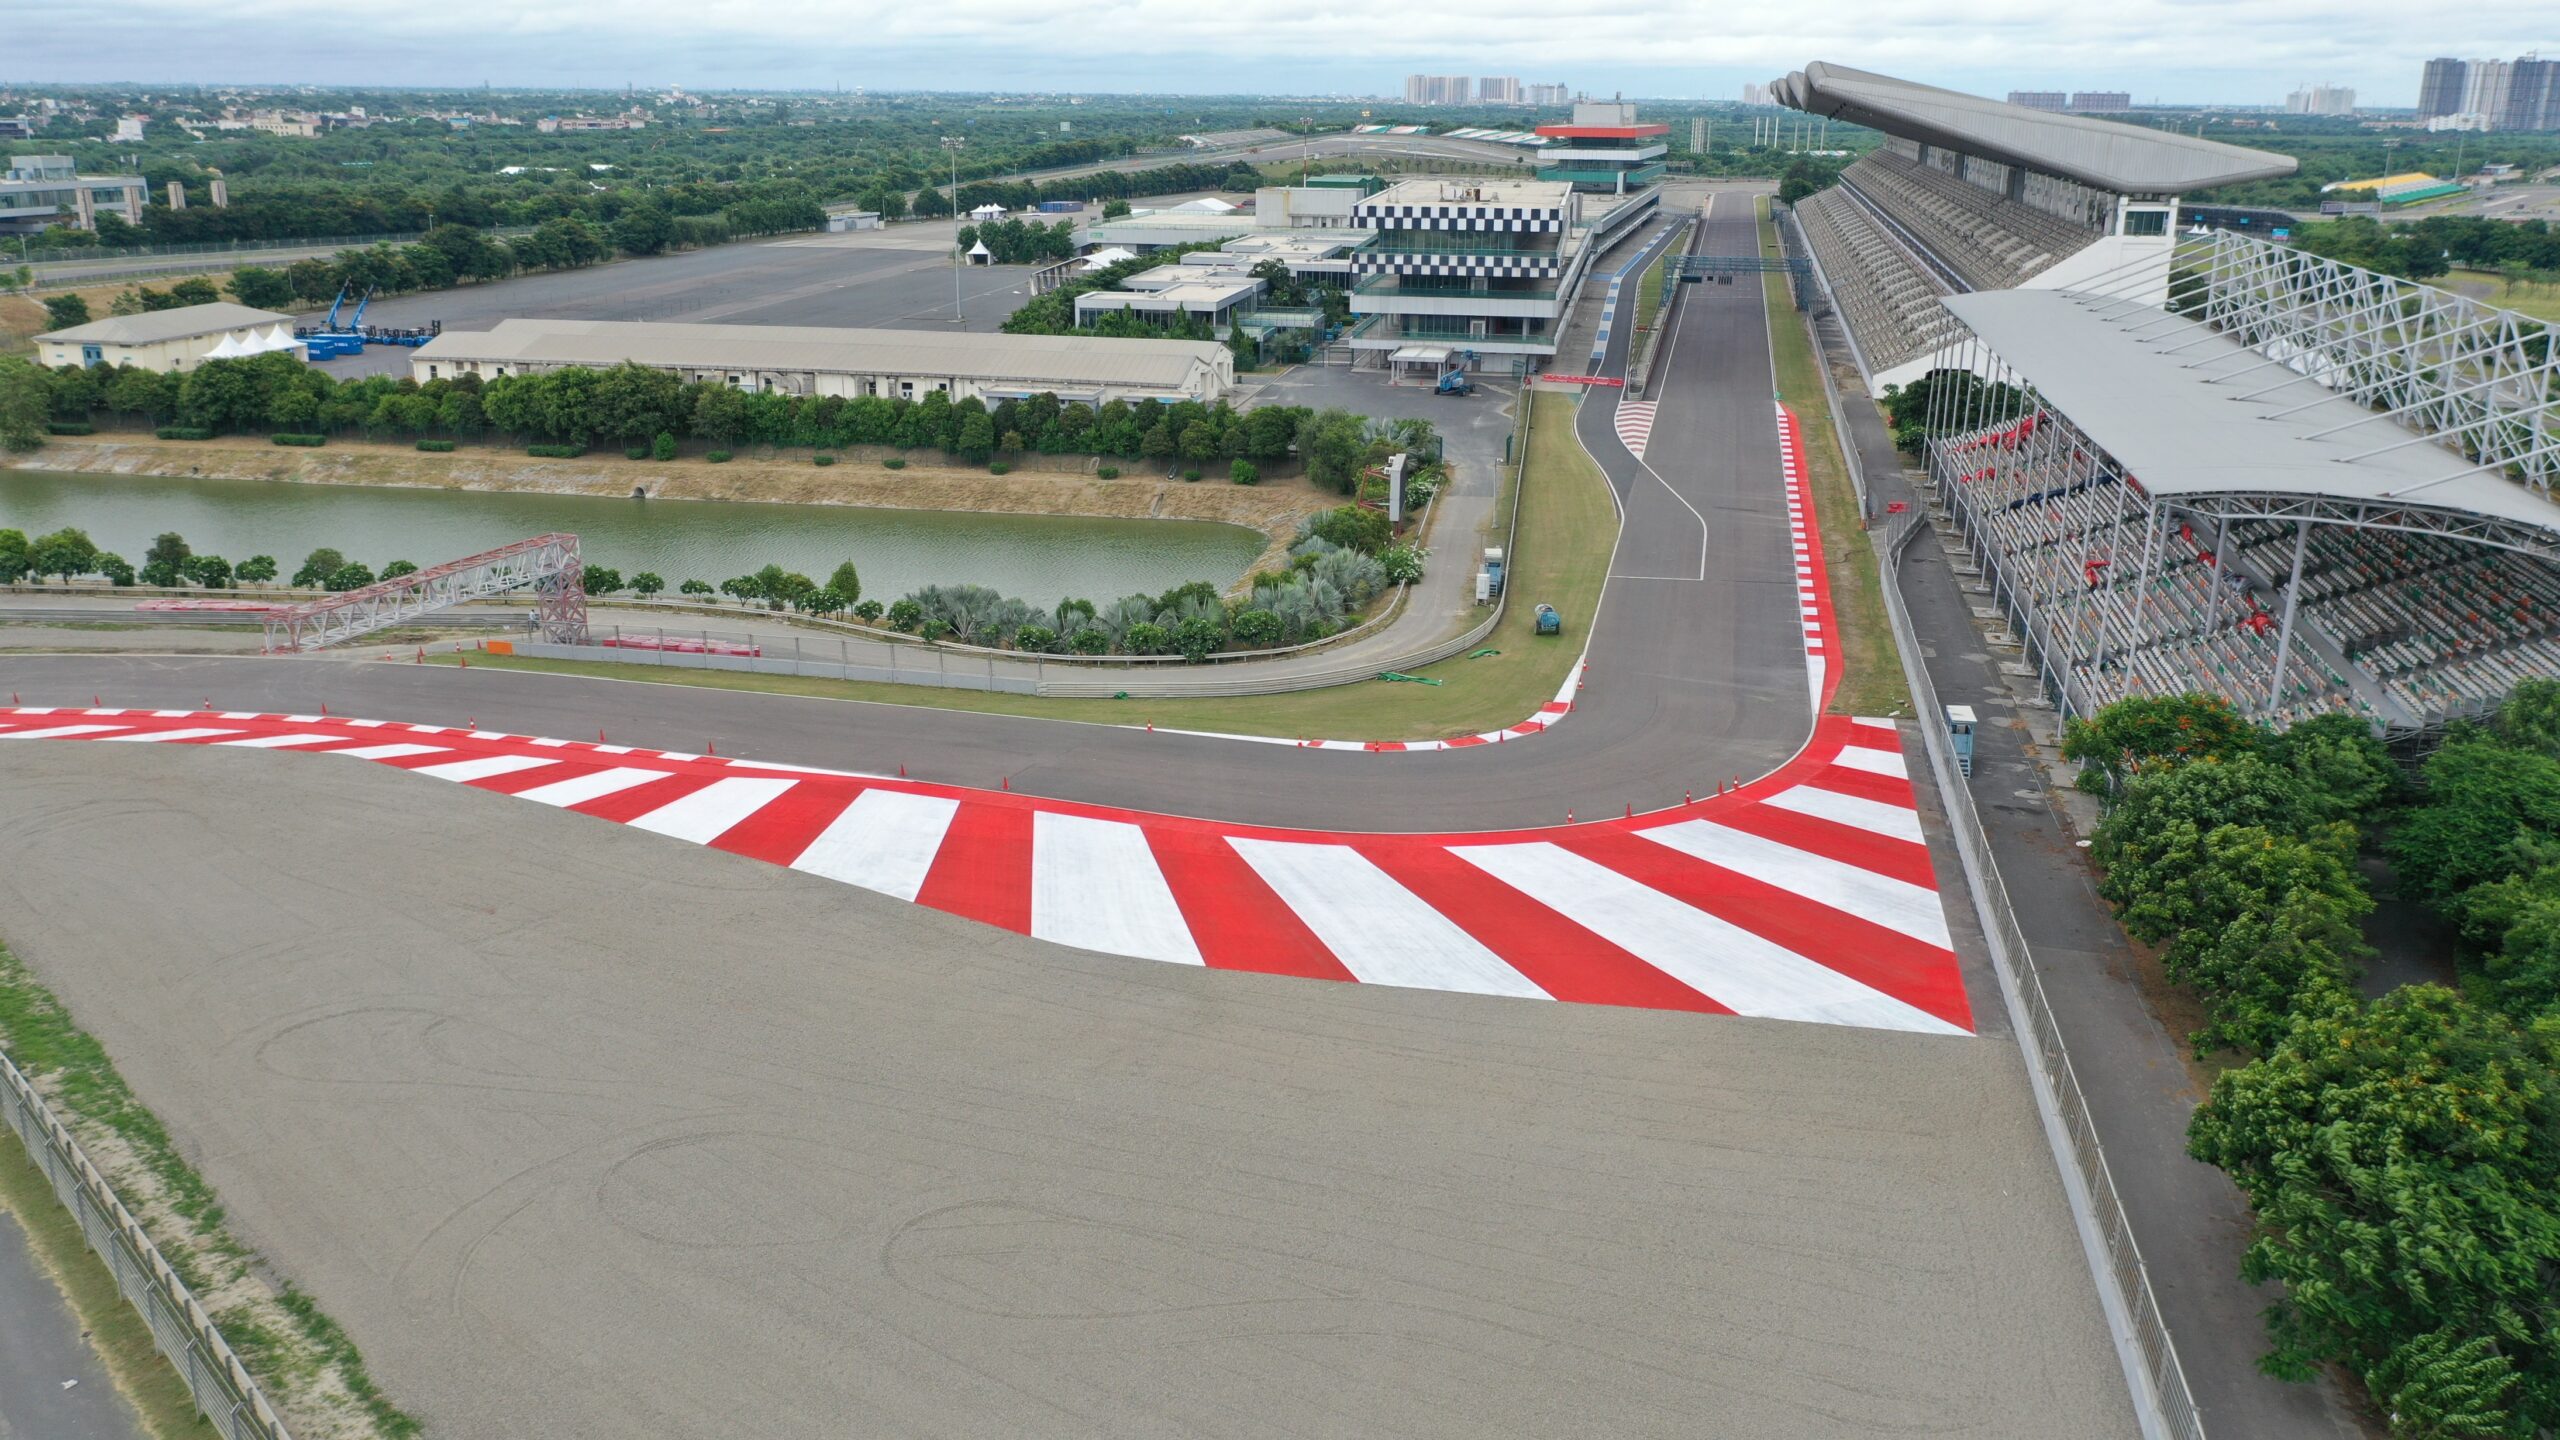 BIC-Revamped and ready to roll. The newly created gravel area is also visible, MotoGP